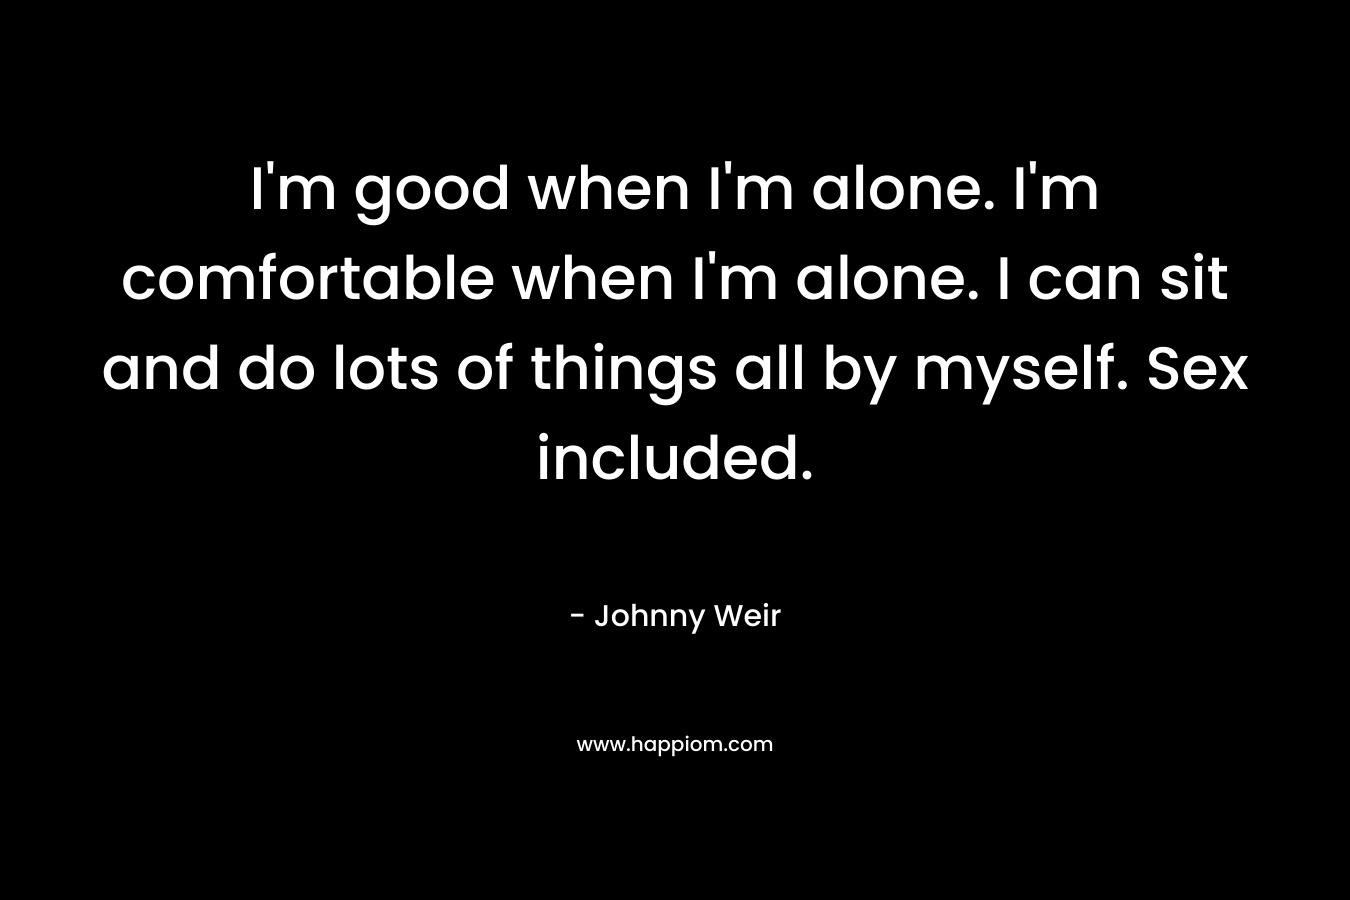 I'm good when I'm alone. I'm comfortable when I'm alone. I can sit and do lots of things all by myself. Sex included.